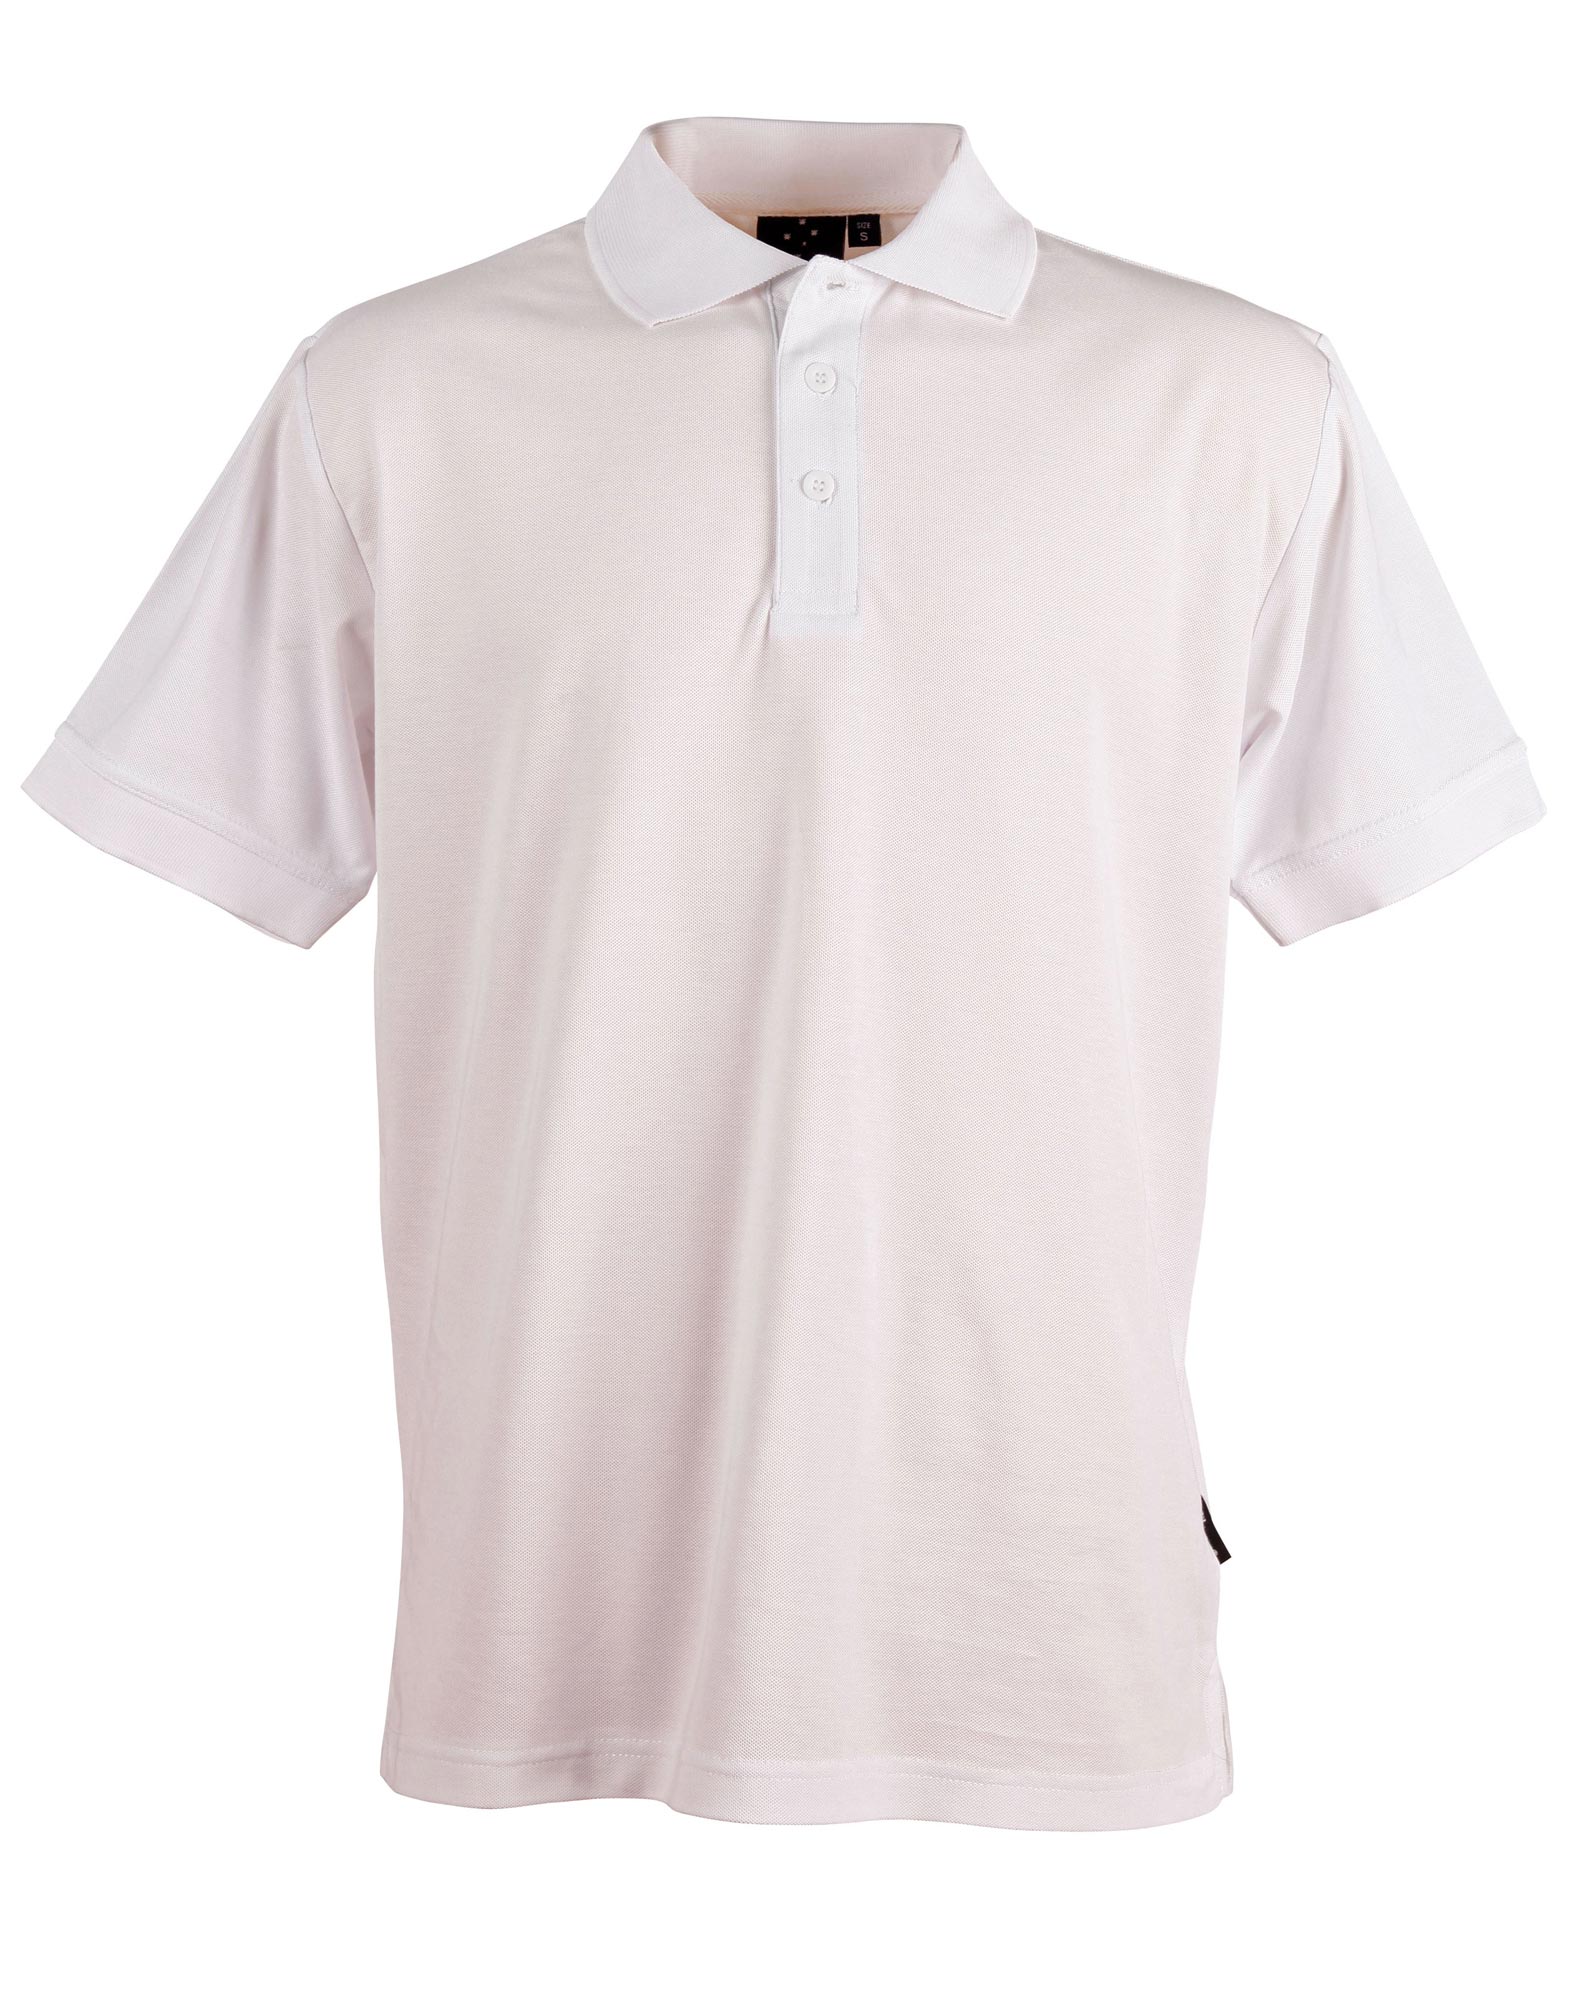 PS63/PS64 CONNECTION POLO Men’s&Ladies’